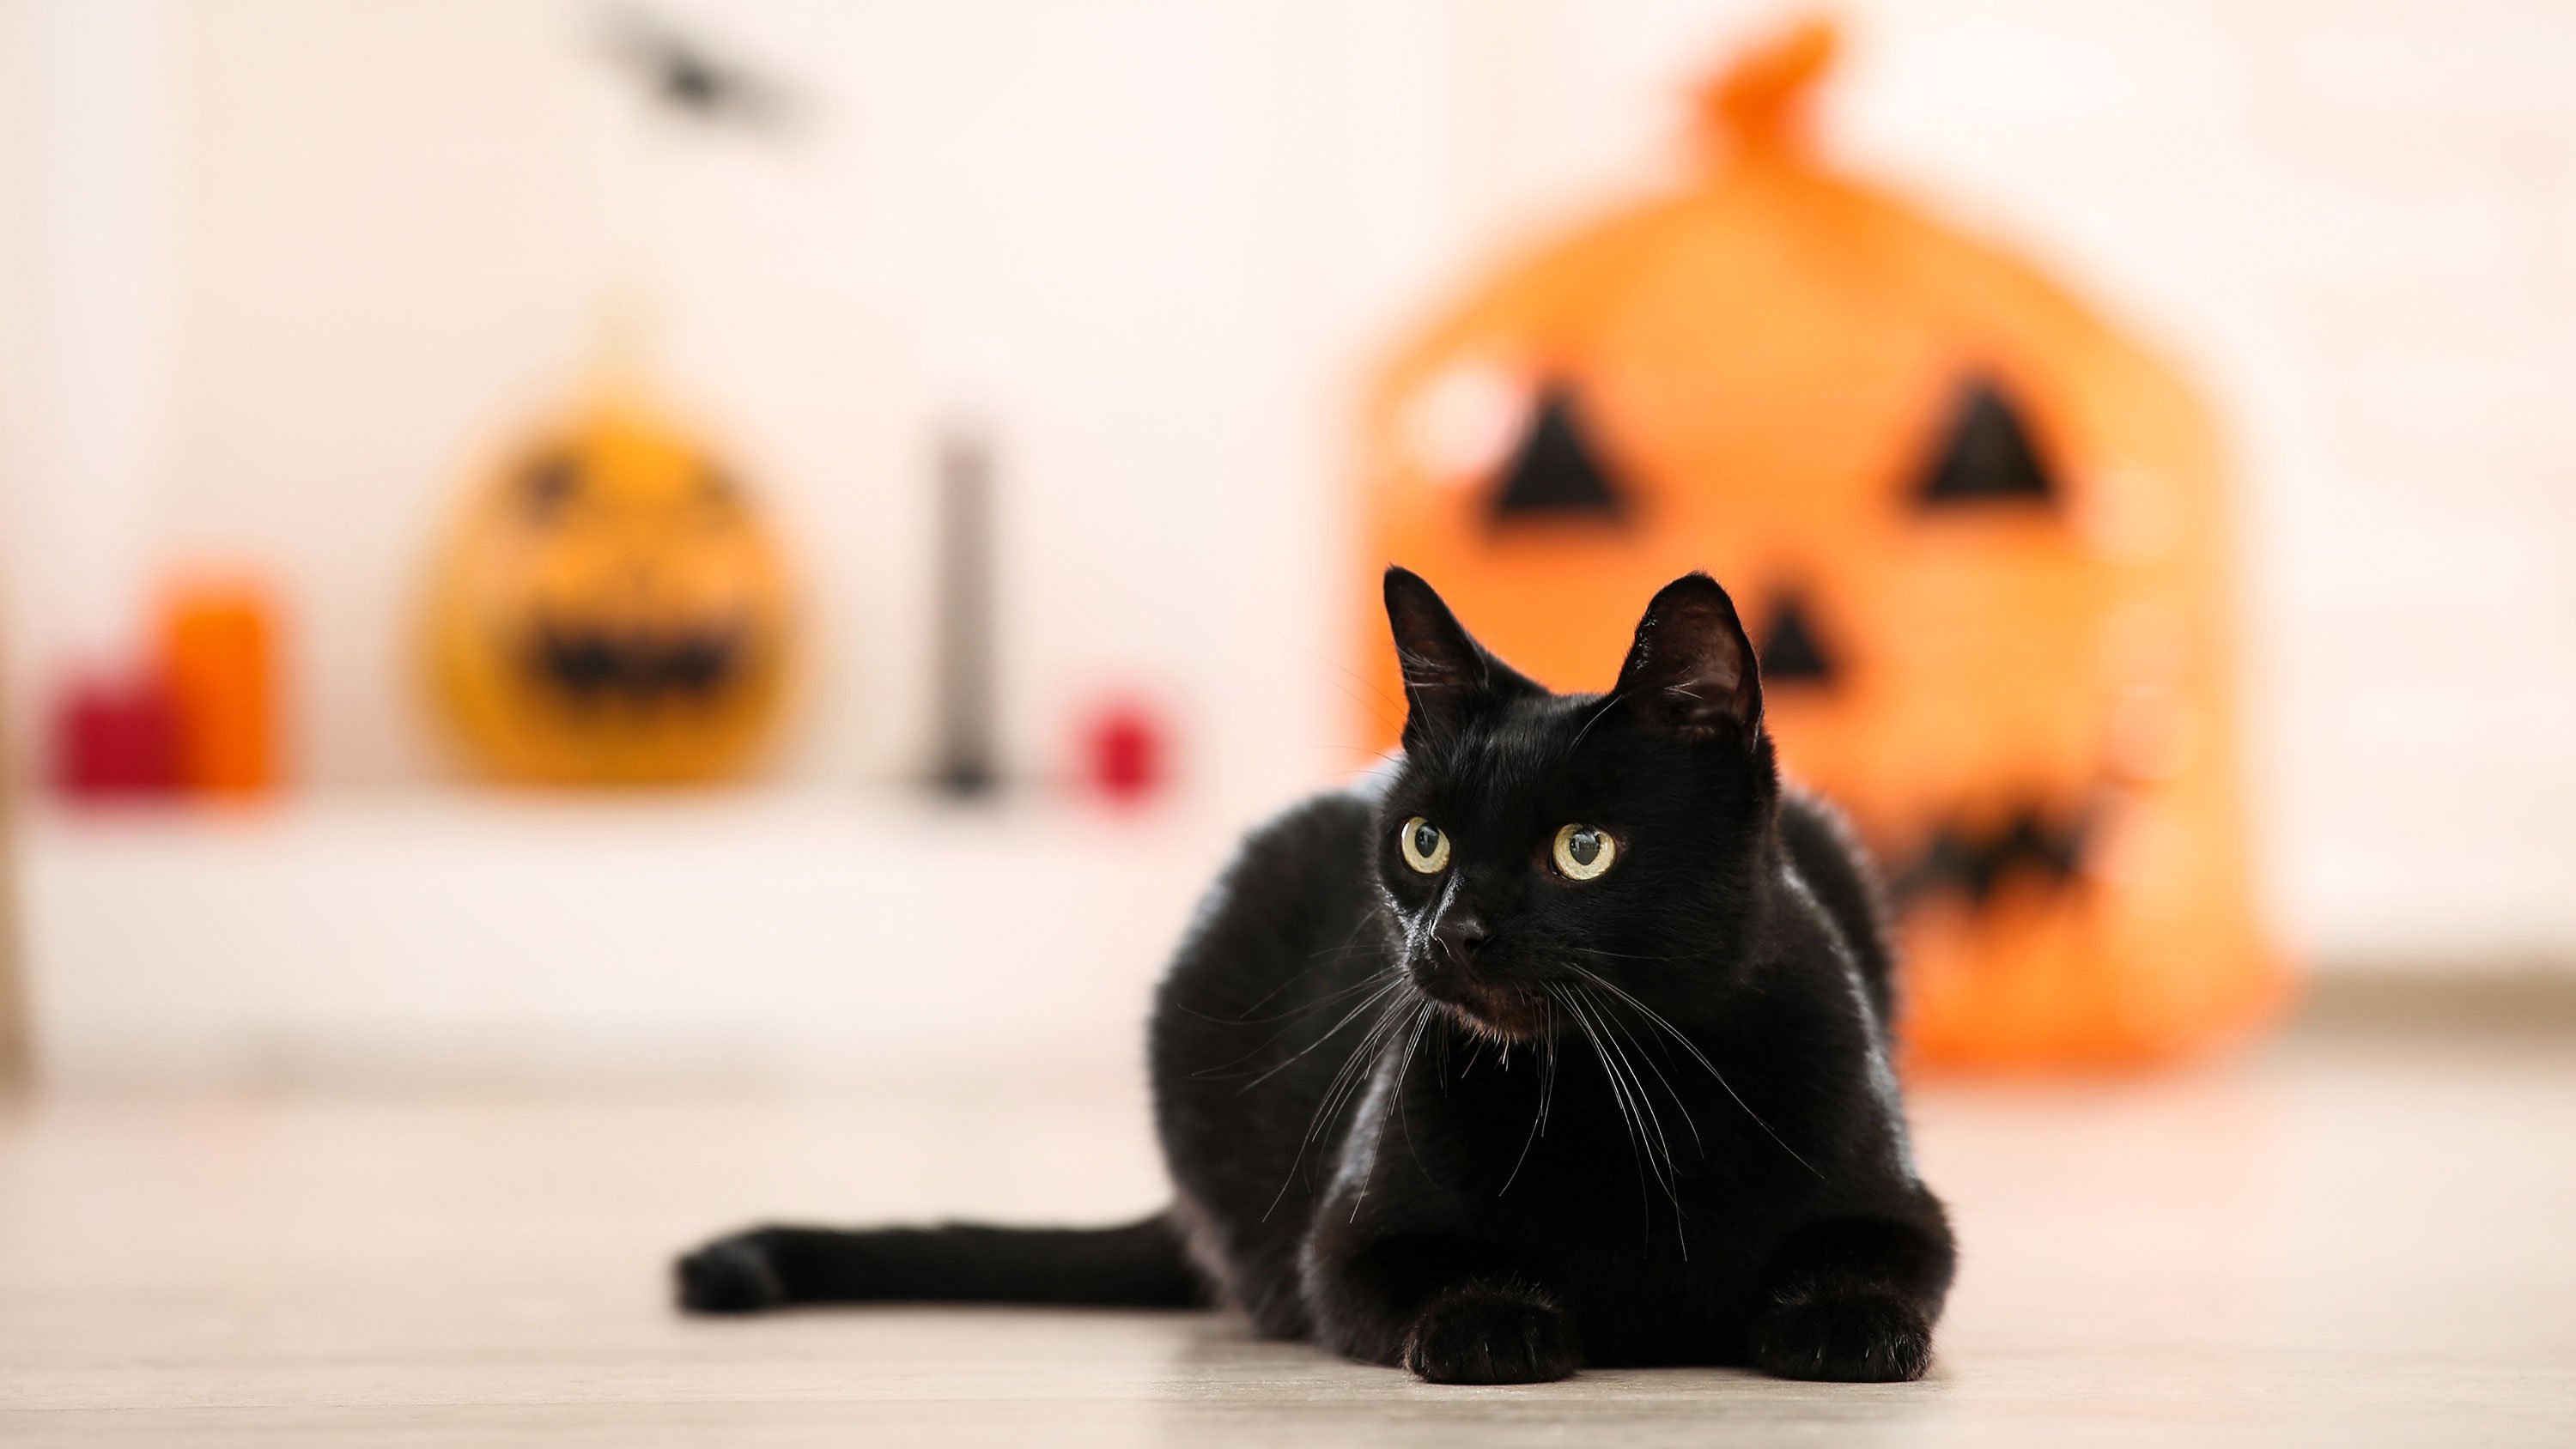 It's National Black Cat Day! Here are five facts to know about our black feline friends